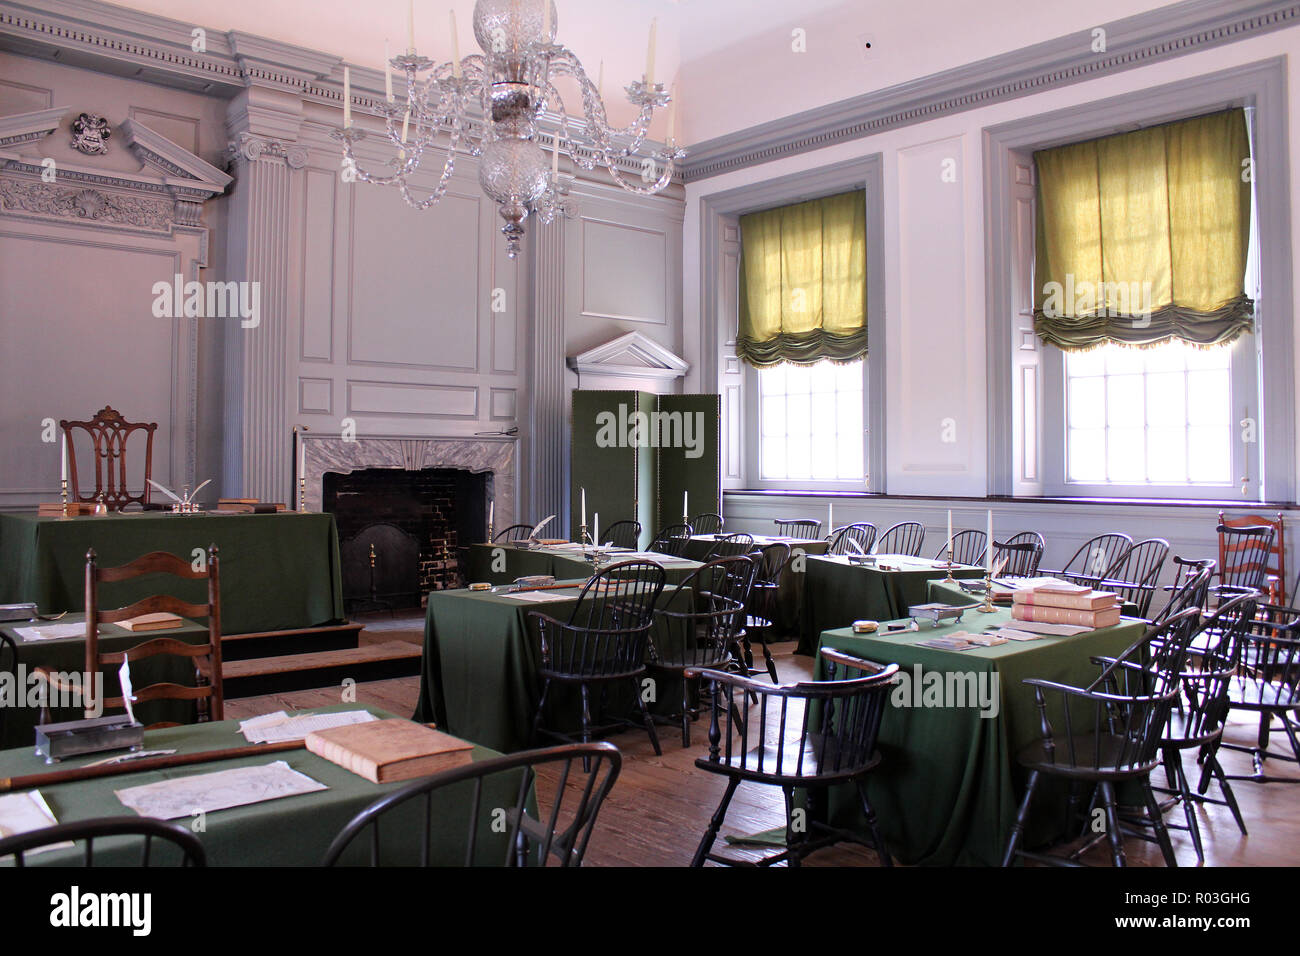 Interior of Independence Hall, place of original signing the Declaration of Independence (1776), Philadelphia, Pennsylvania, USA Stock Photo